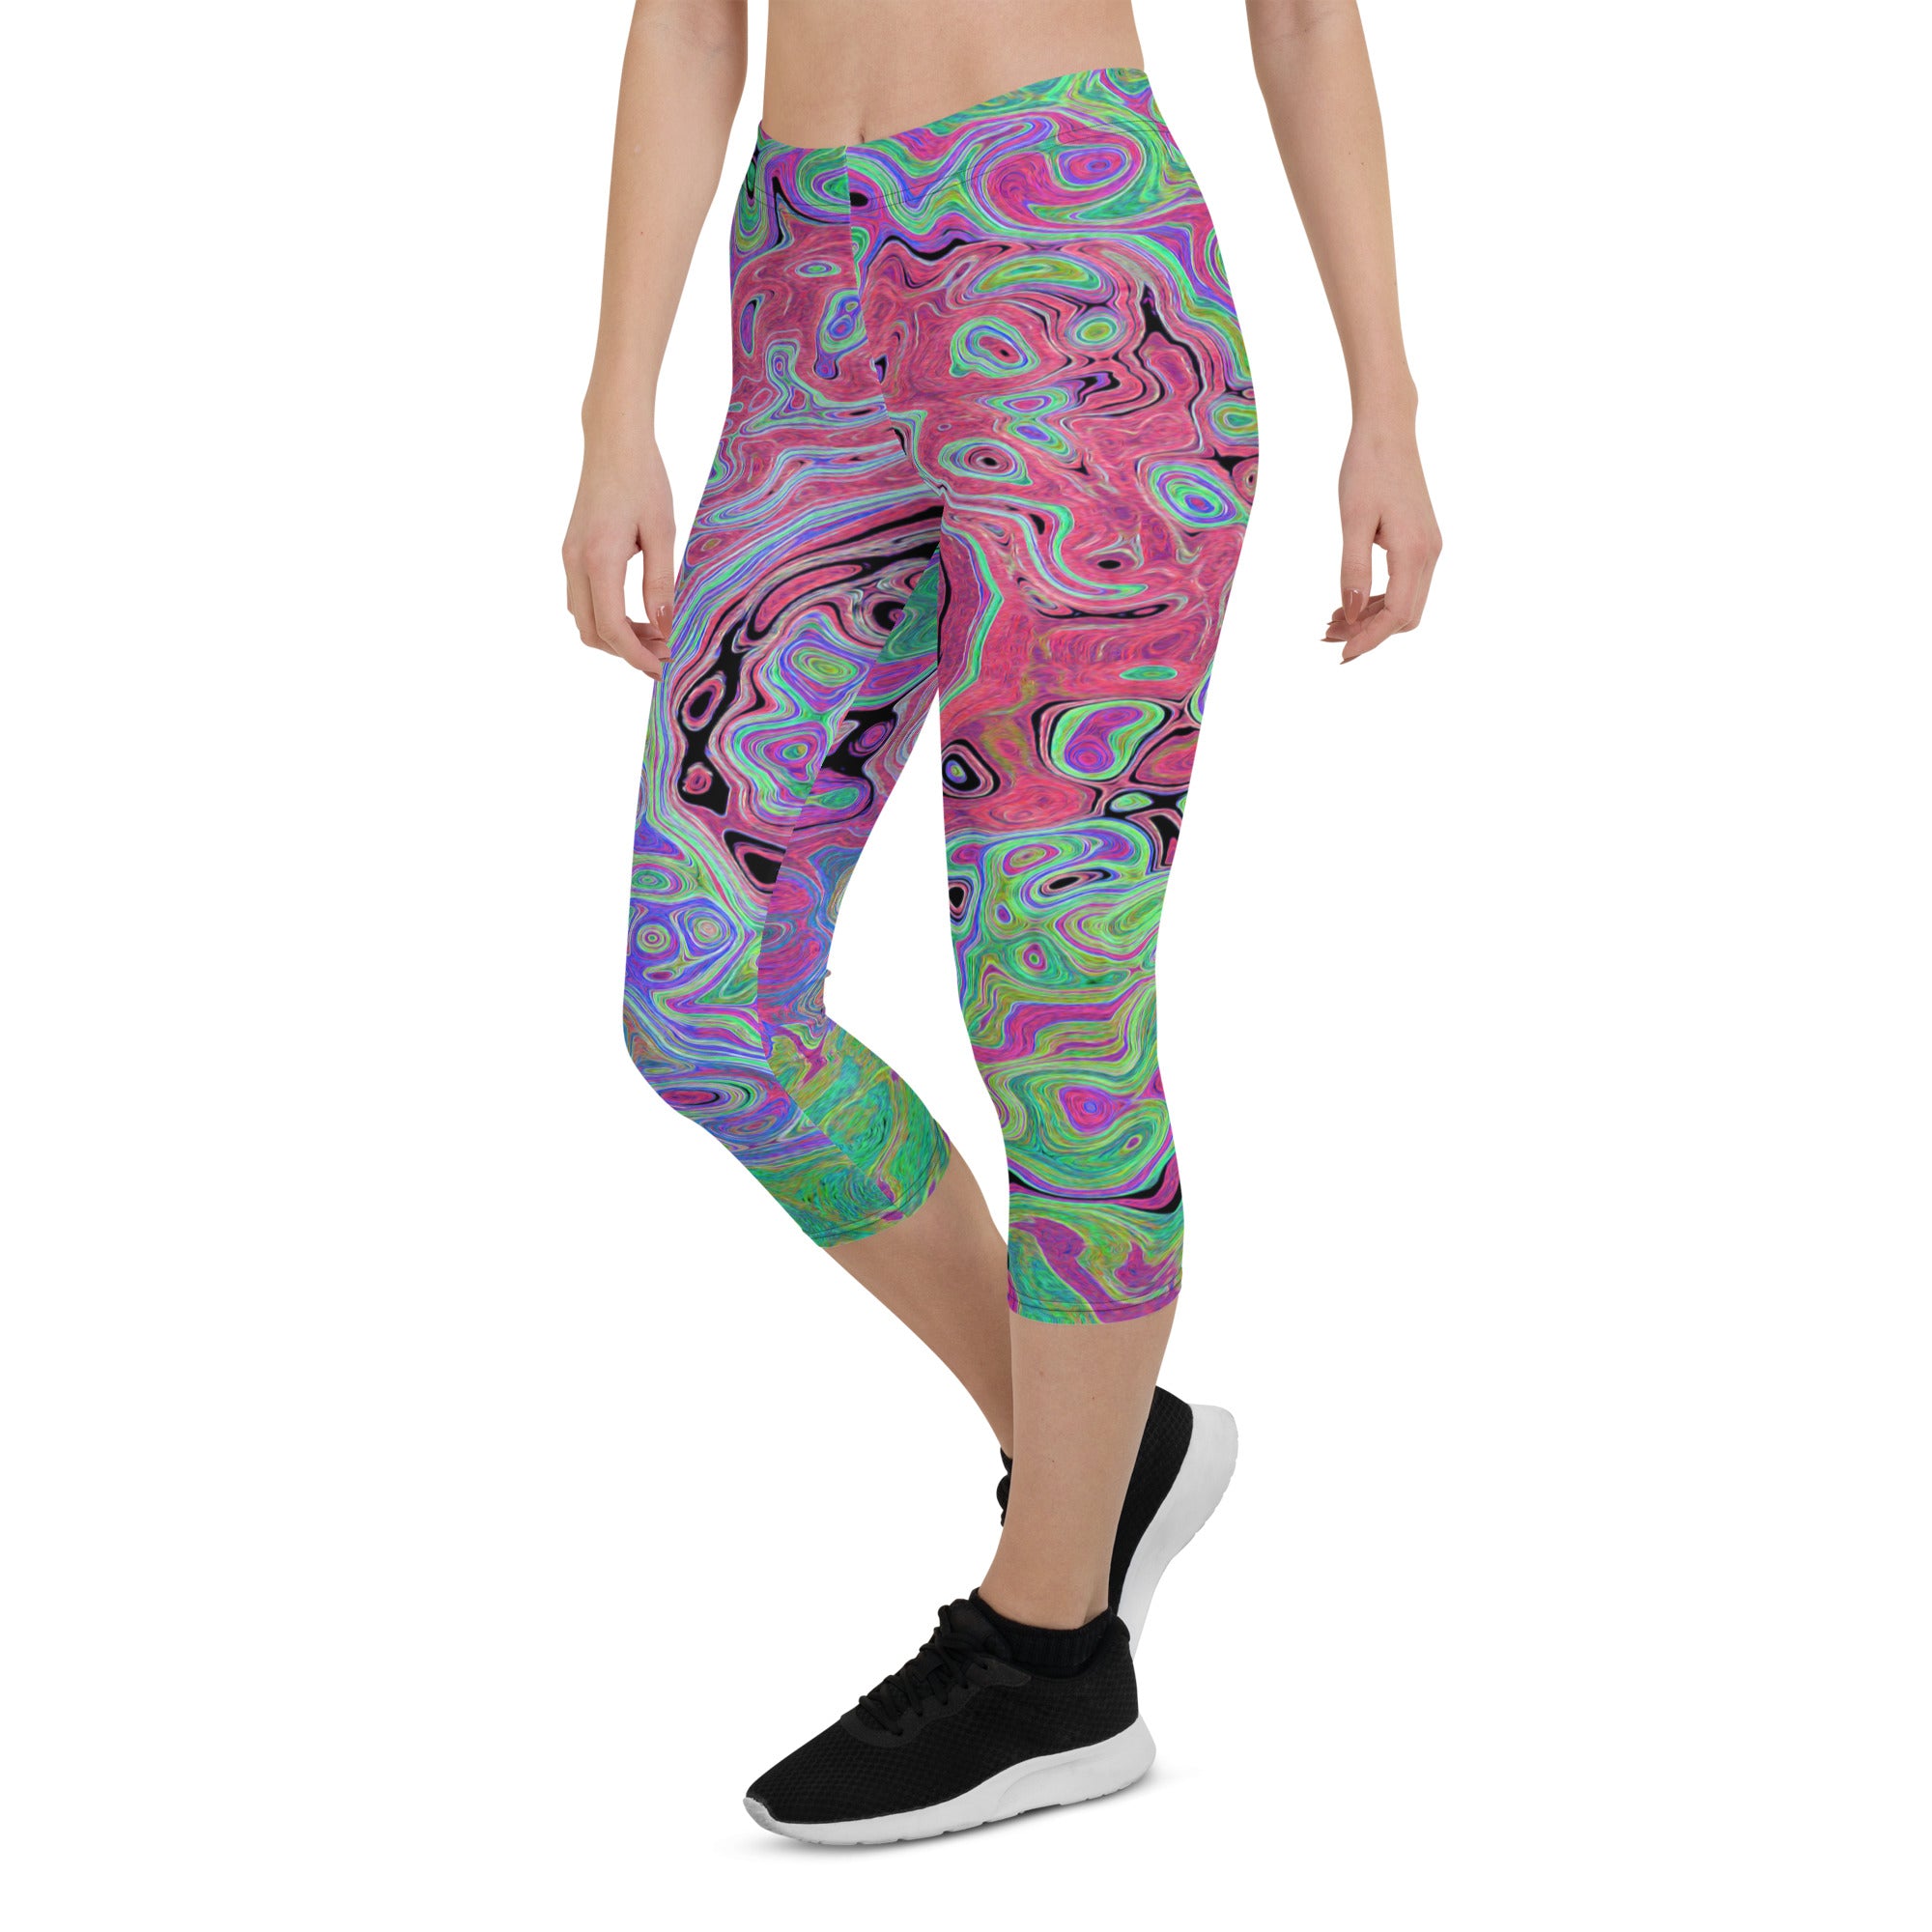 Capri Leggings, Pink and Lime Green Groovy Abstract Retro Swirl